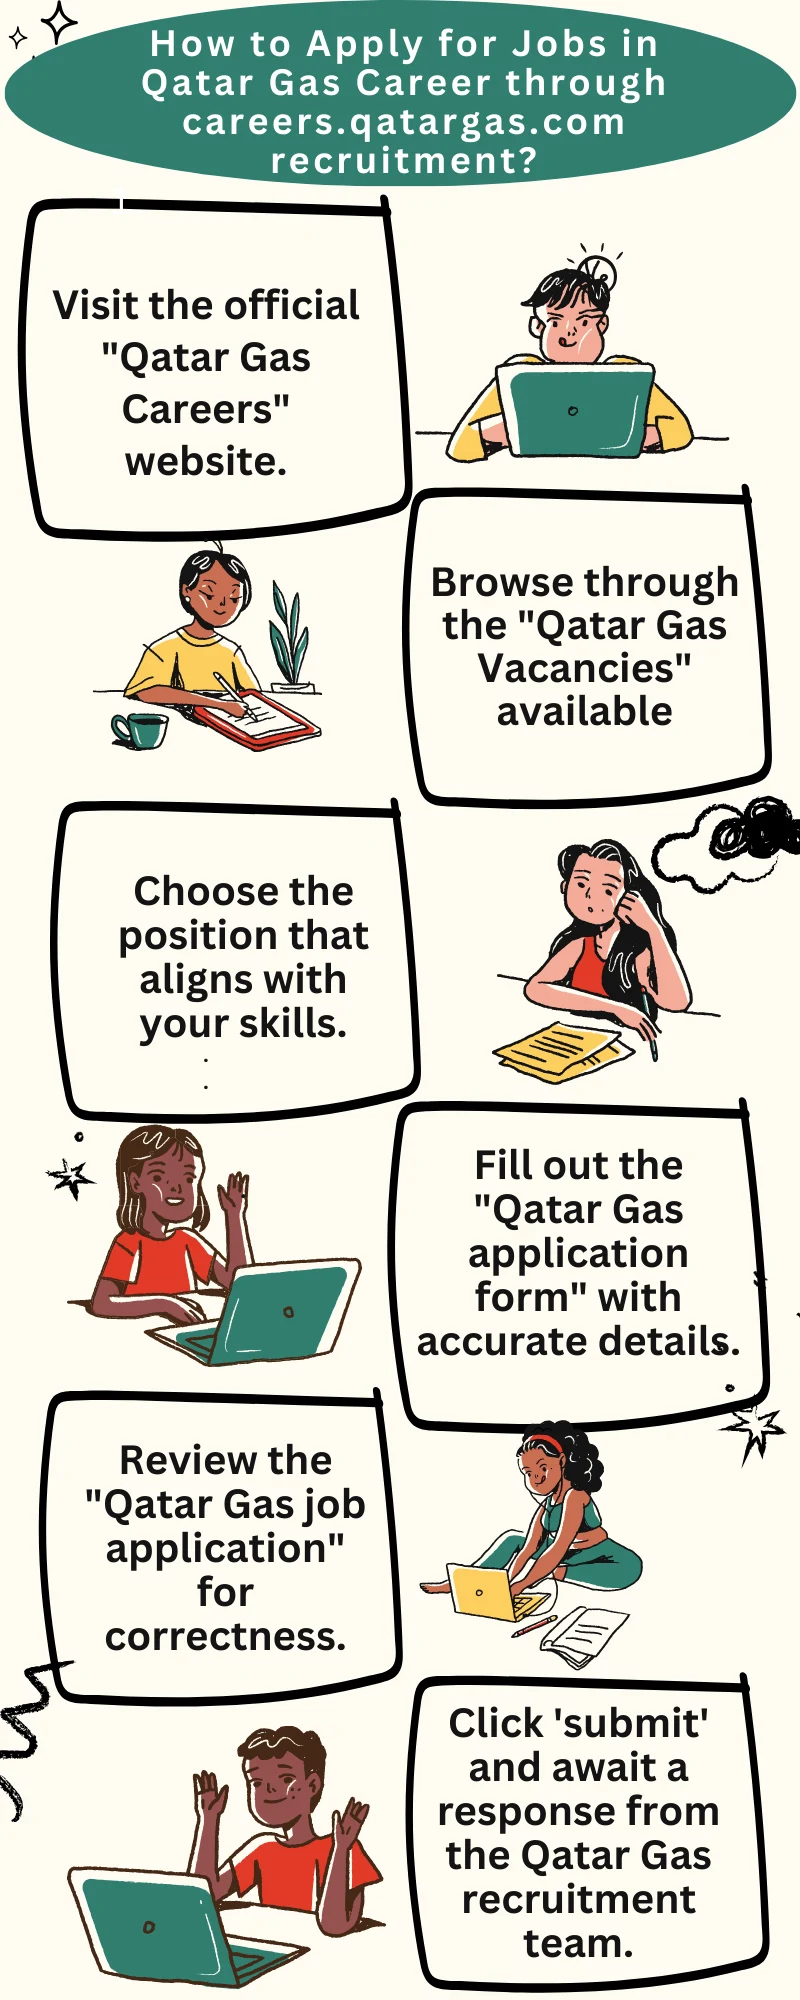 How to Apply for Jobs in Qatar Gas Career through careers.qatargas.com recruitment_